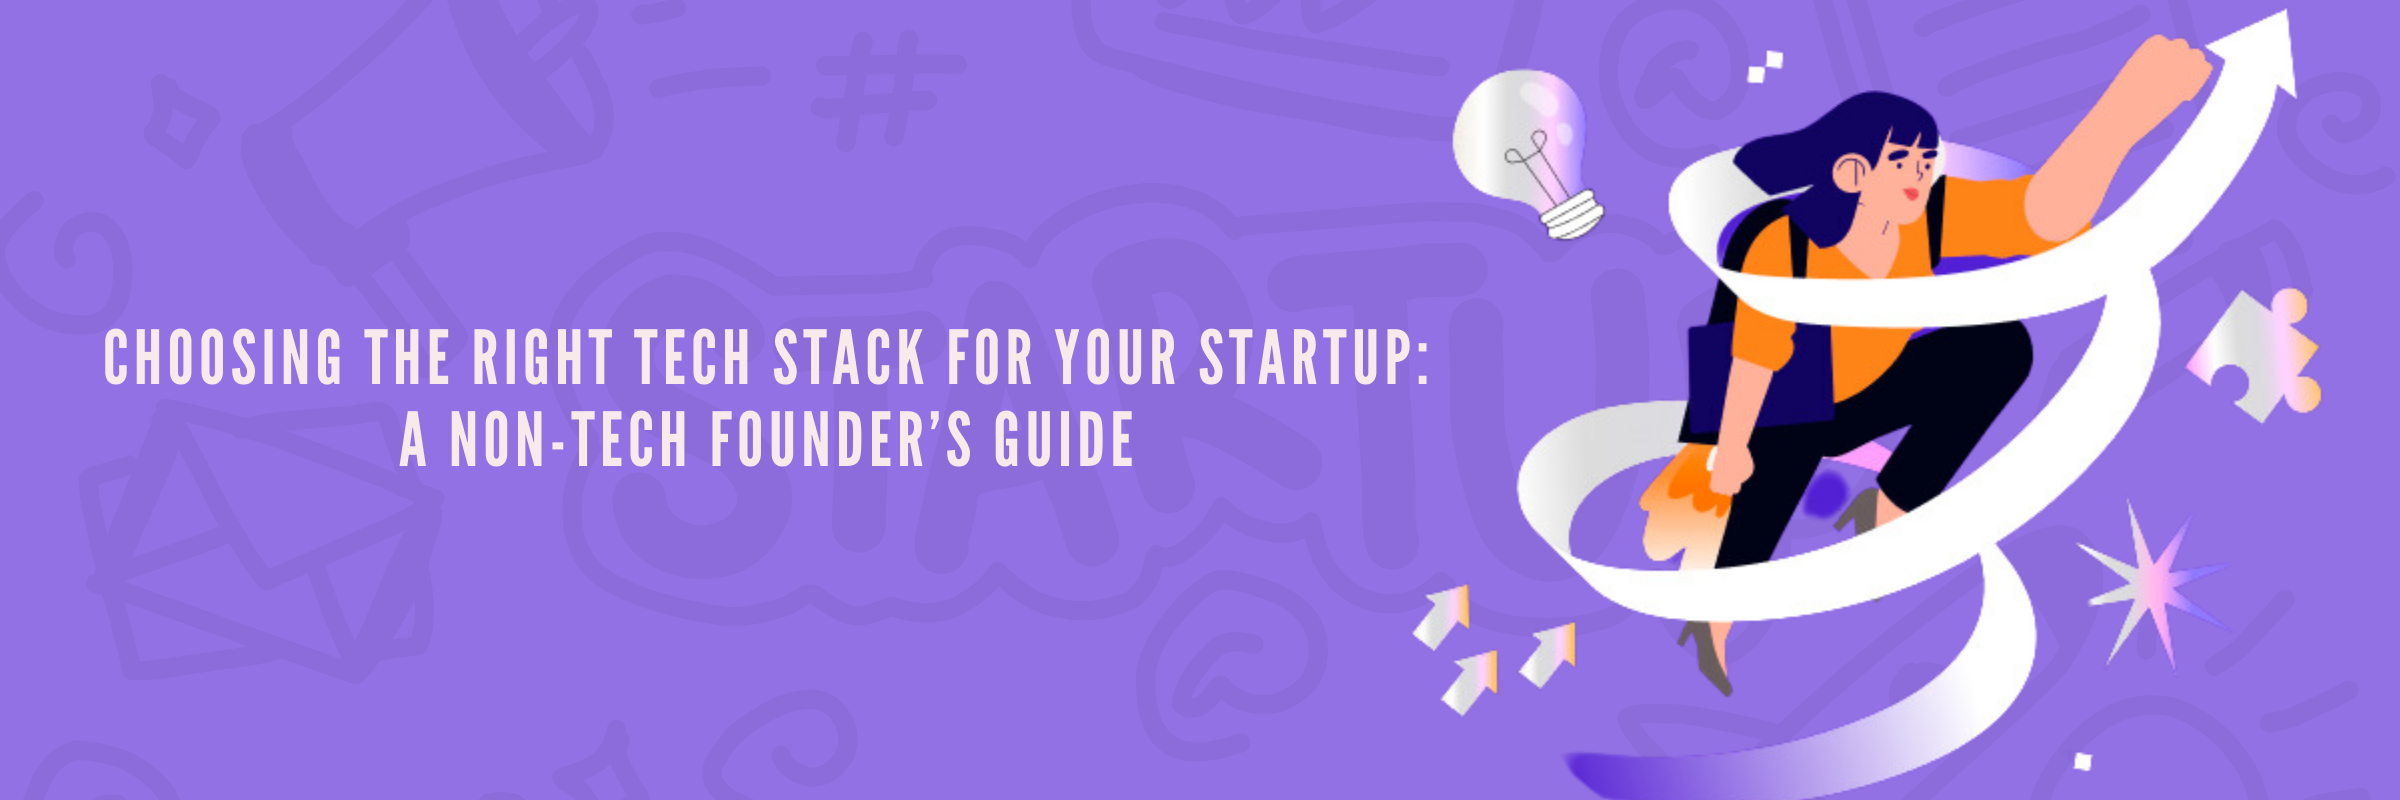 Choosing the Right Tech Stack for Your Startup: A Non-Tech Founder’s Guide